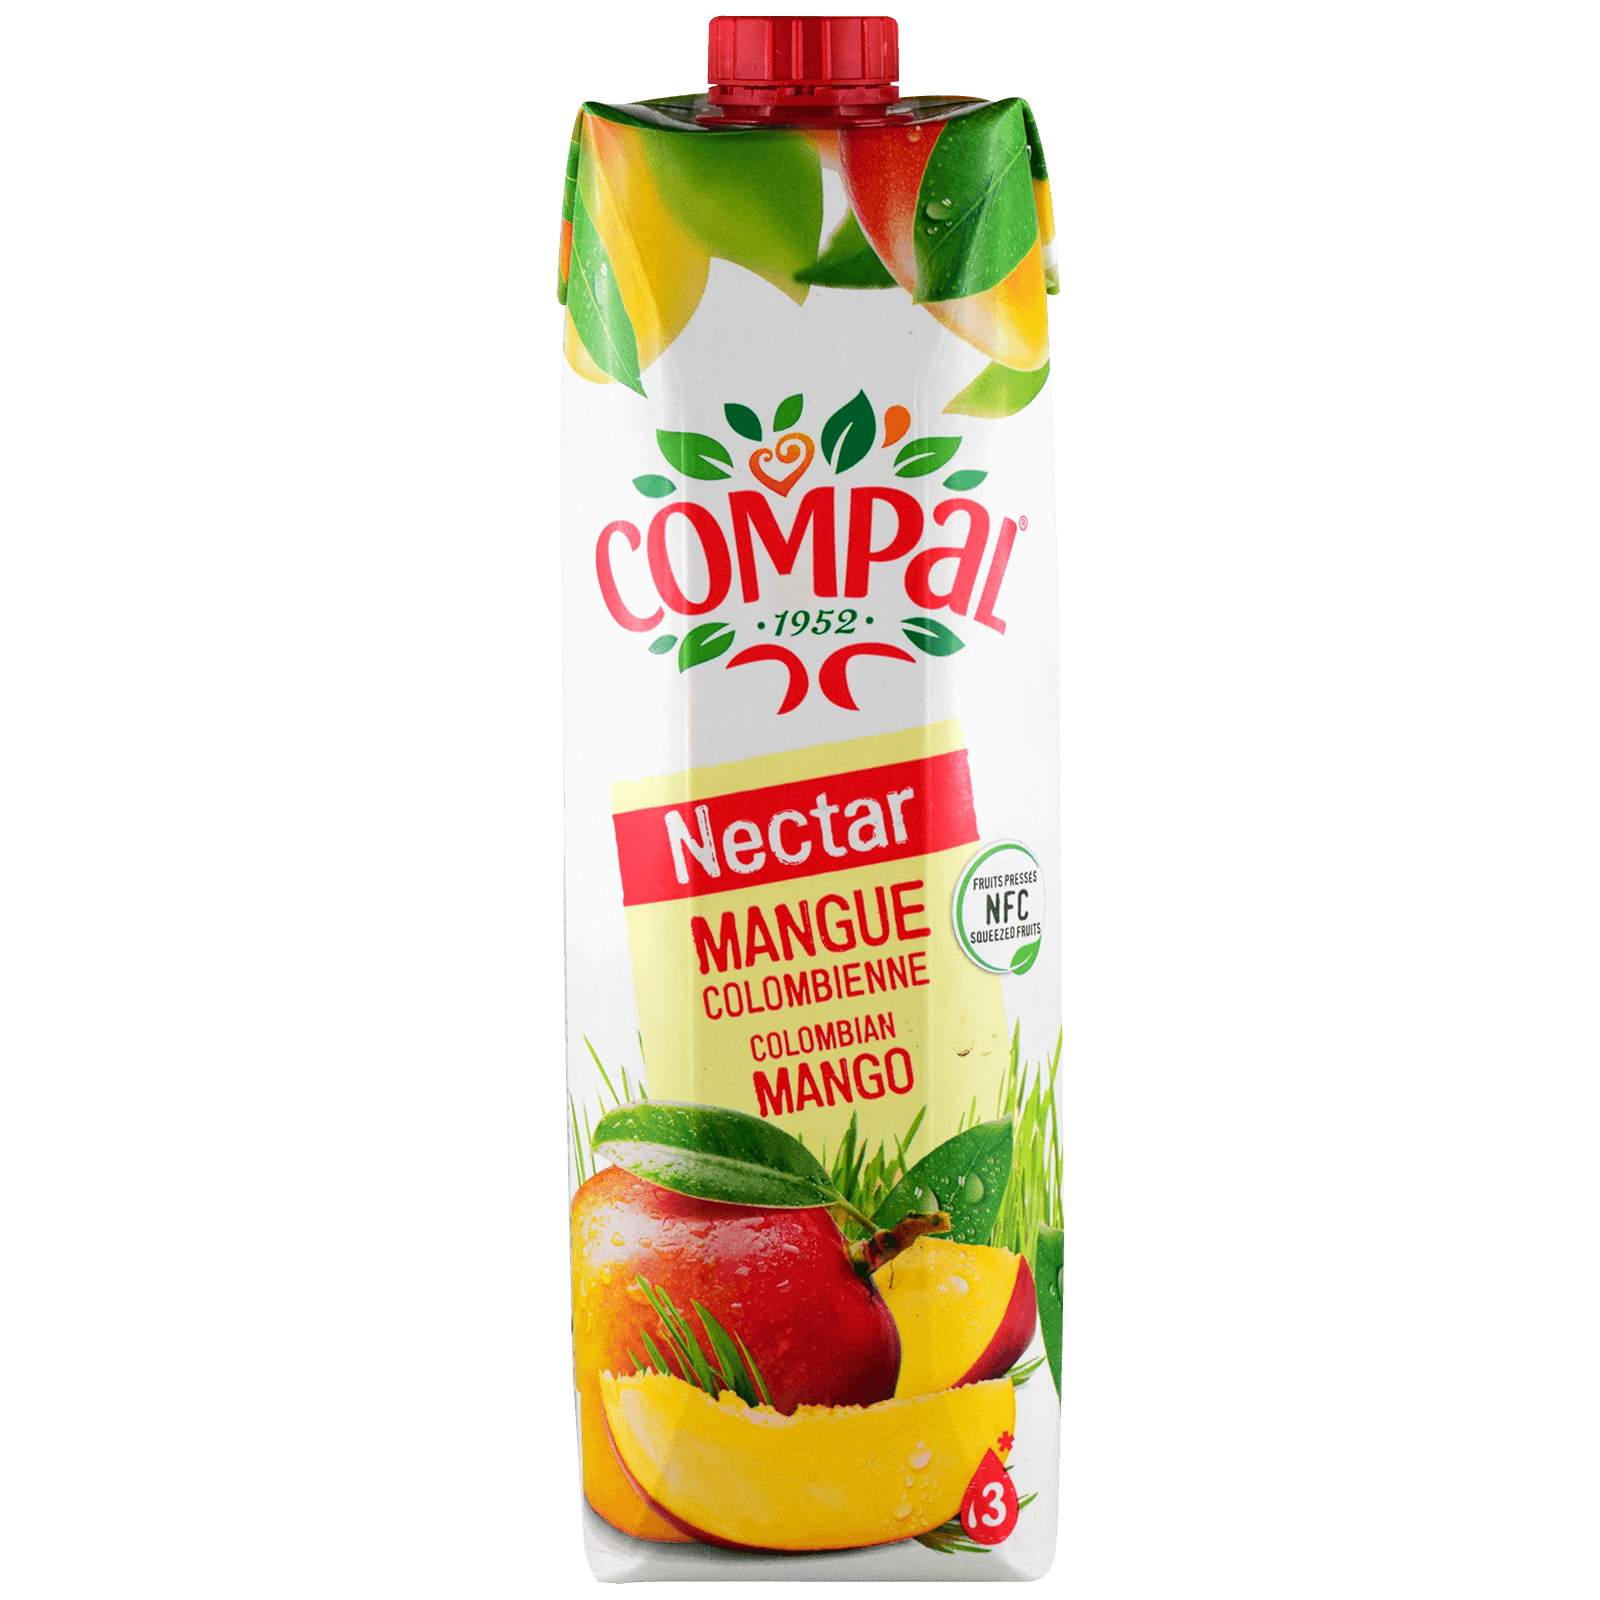 Compal nectar peach l. Juice clipart packet drink